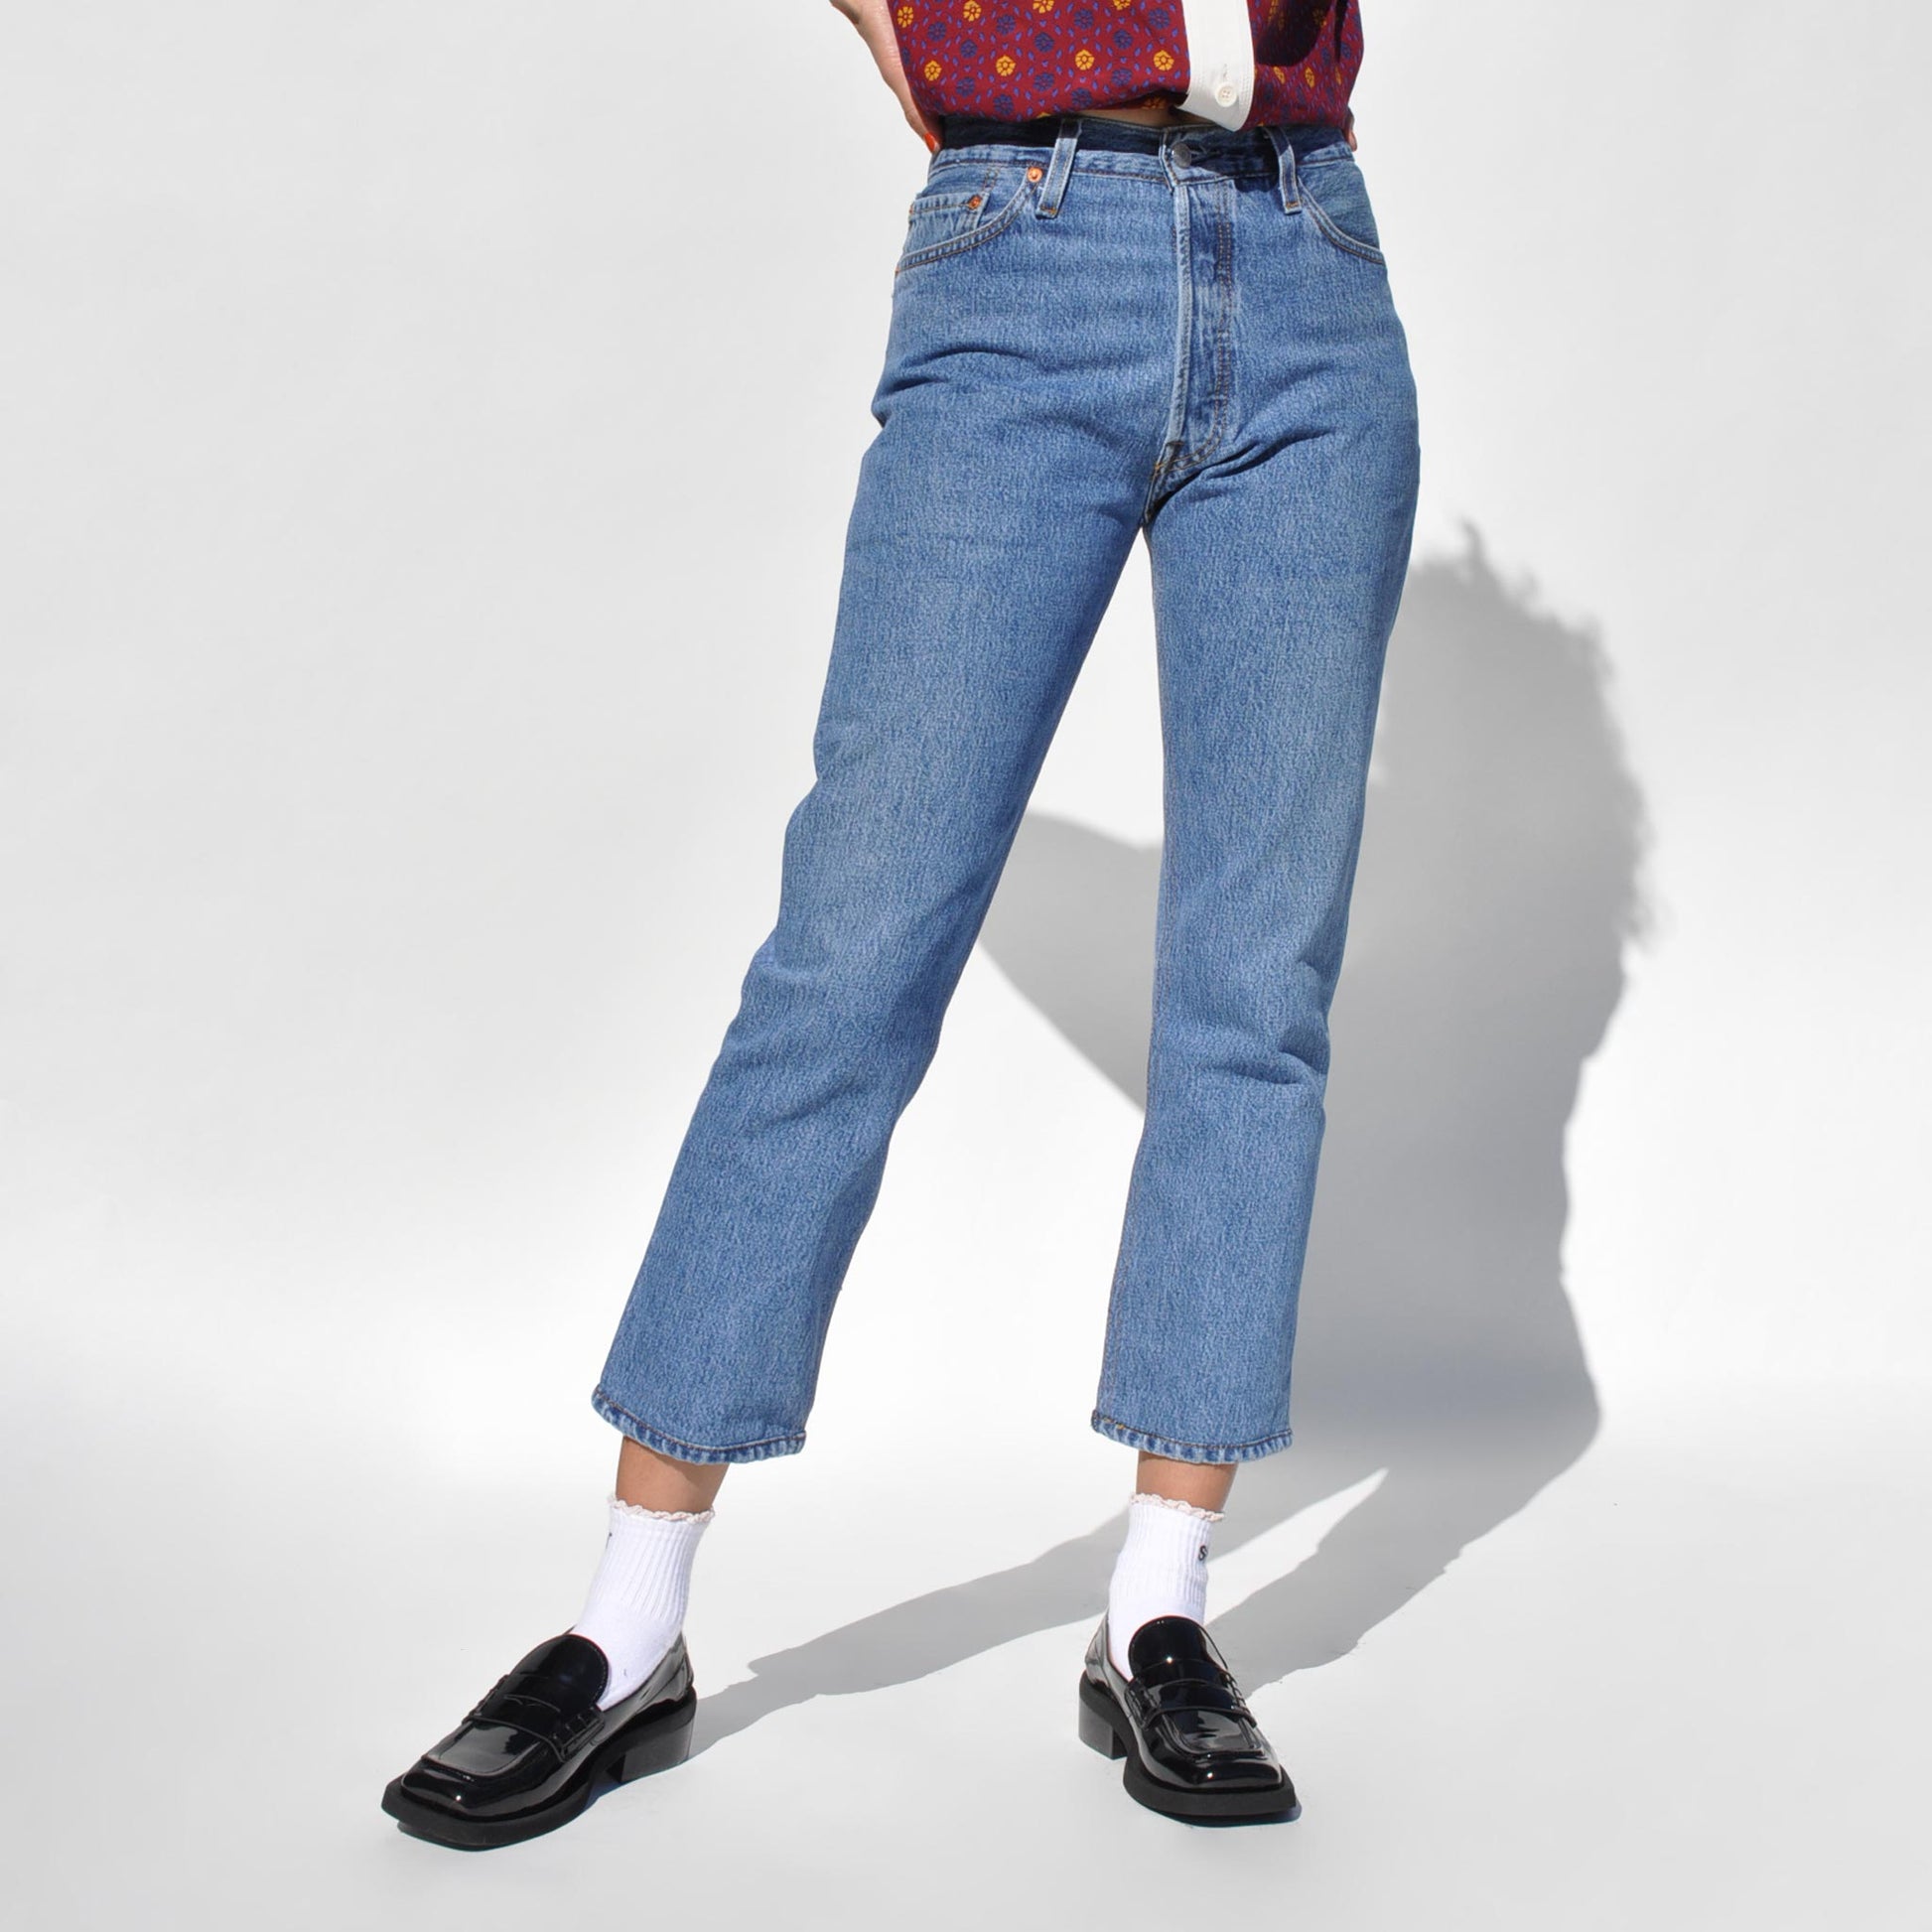 RE/Done - High Rise Crop Redone Levi's Jeans - Indigo | available at LCD